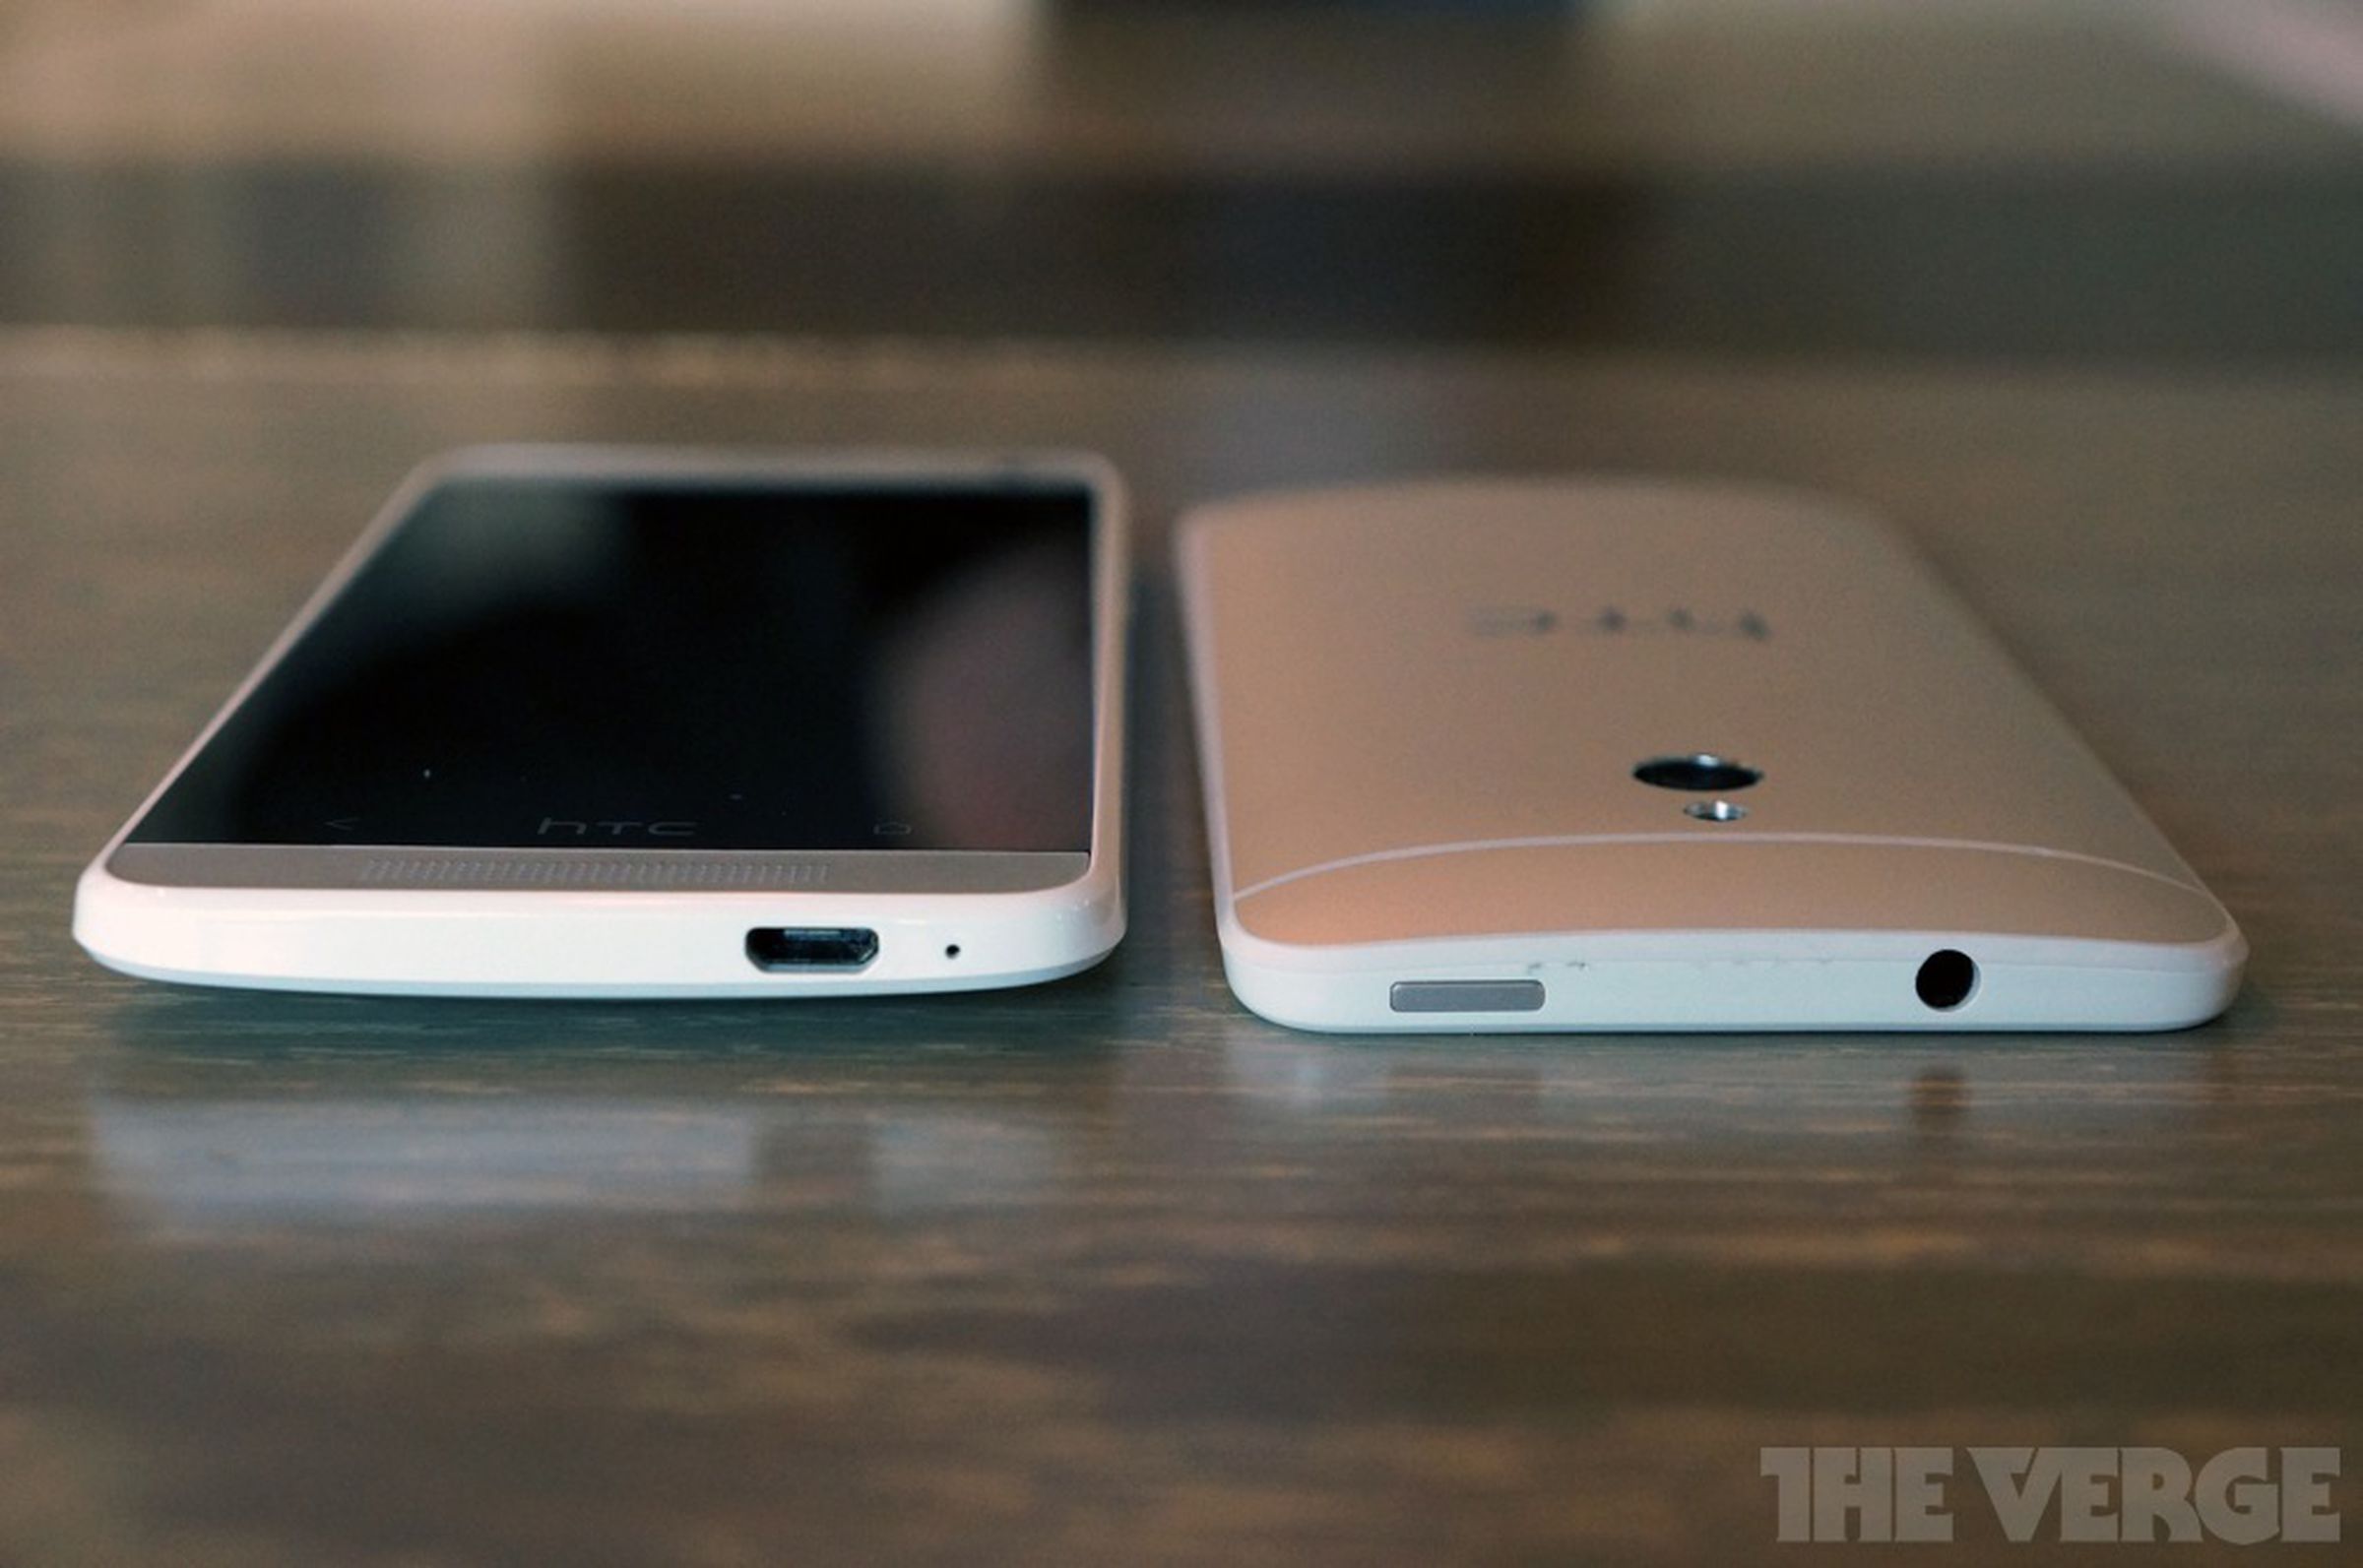 HTC One mini hands-on photos